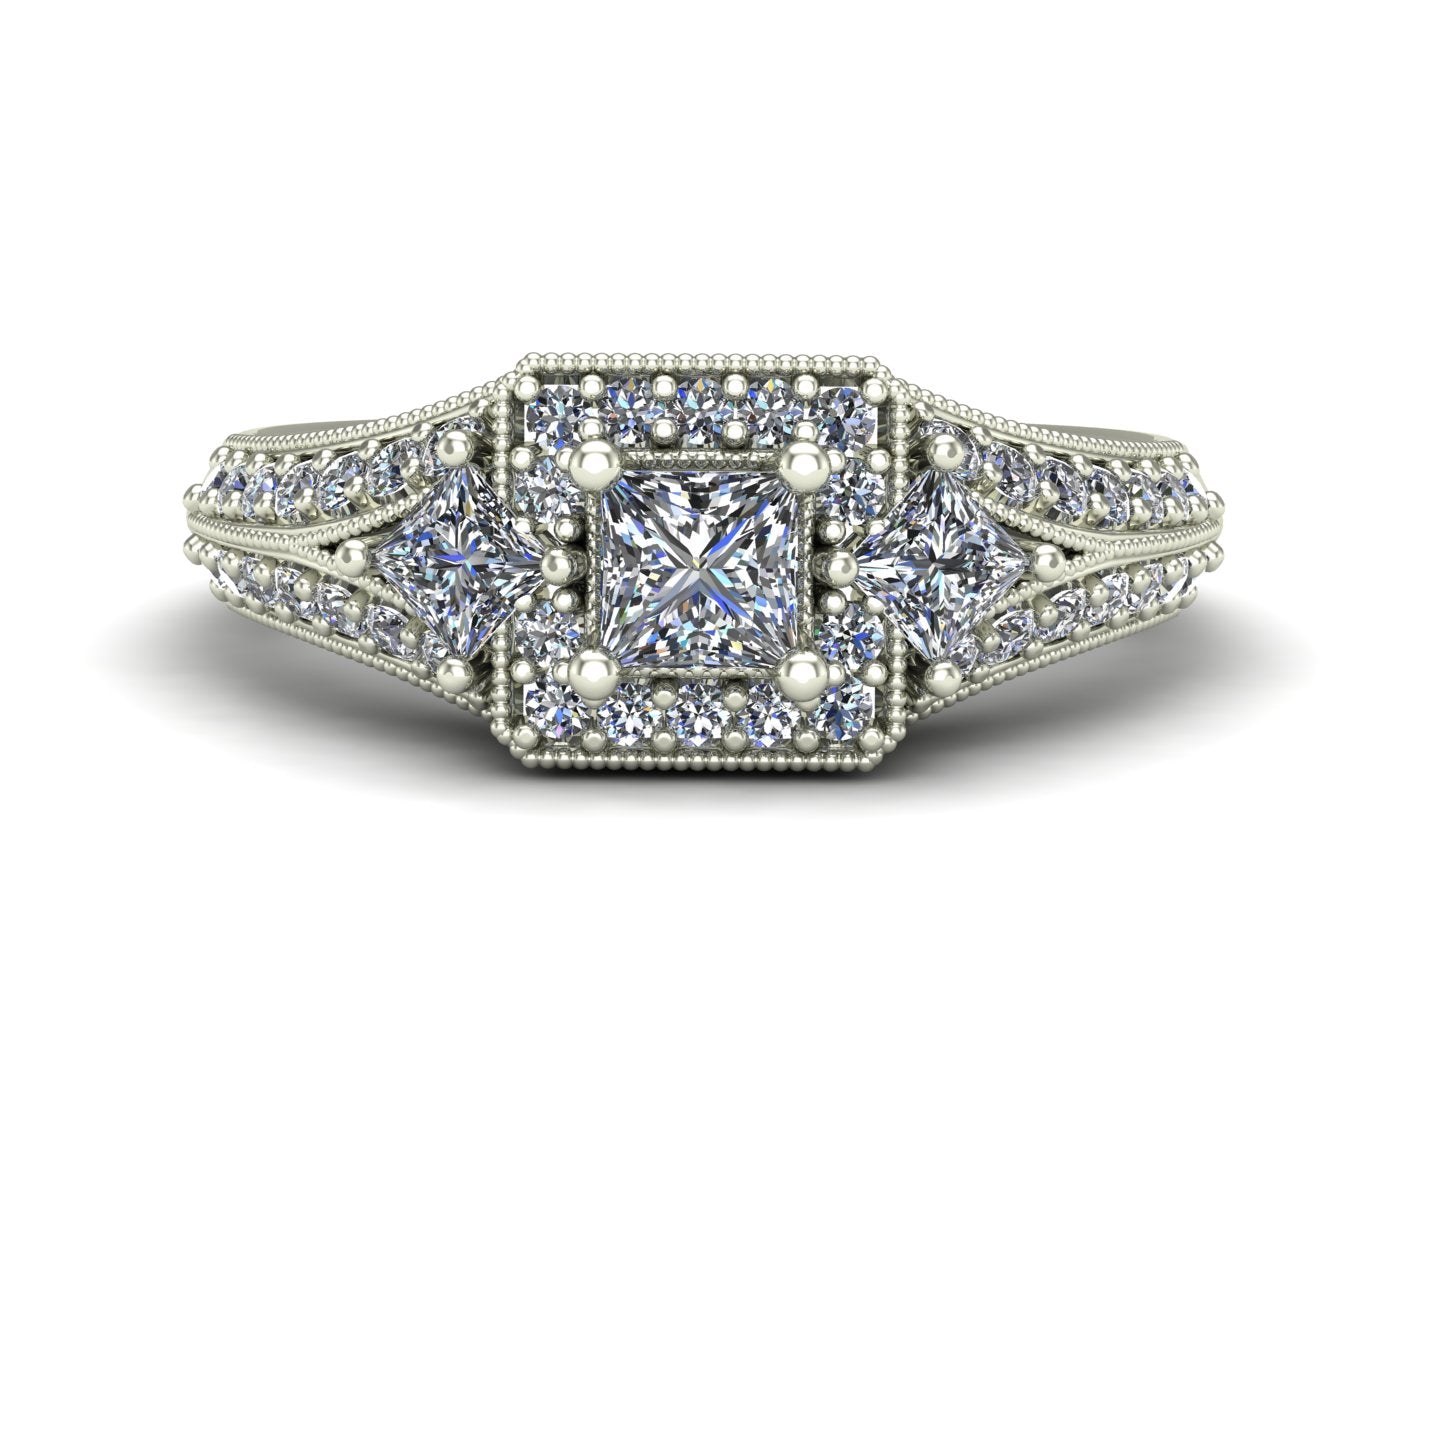 princess cut diamond three stone engagement ring with split shank in 14k white gold - Charles Babb Designs - top view